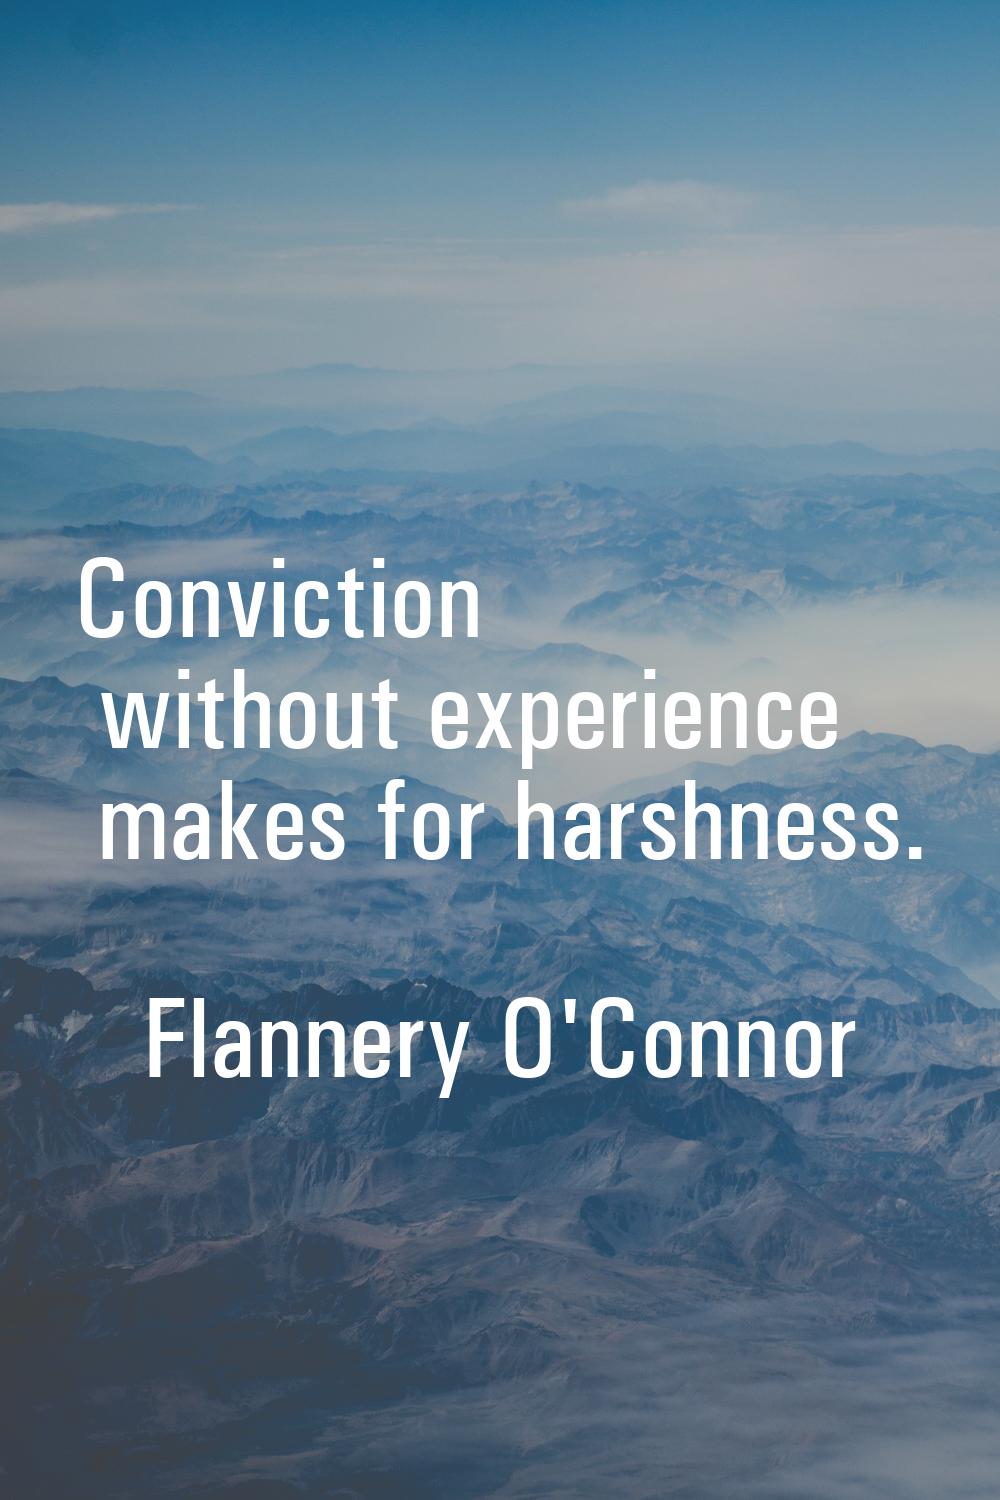 Conviction without experience makes for harshness.